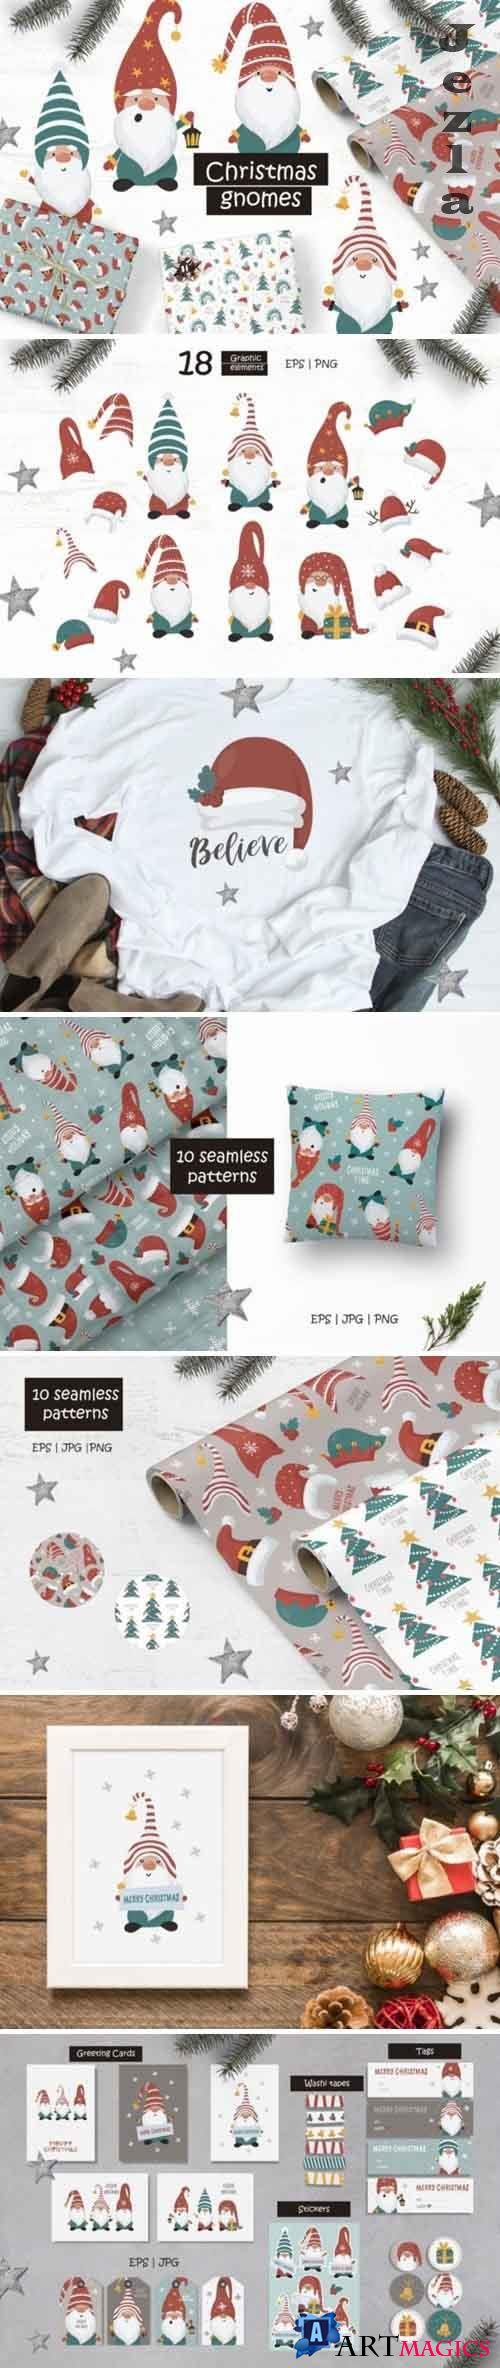 Christmas Gnomes and Patterns - 5652971